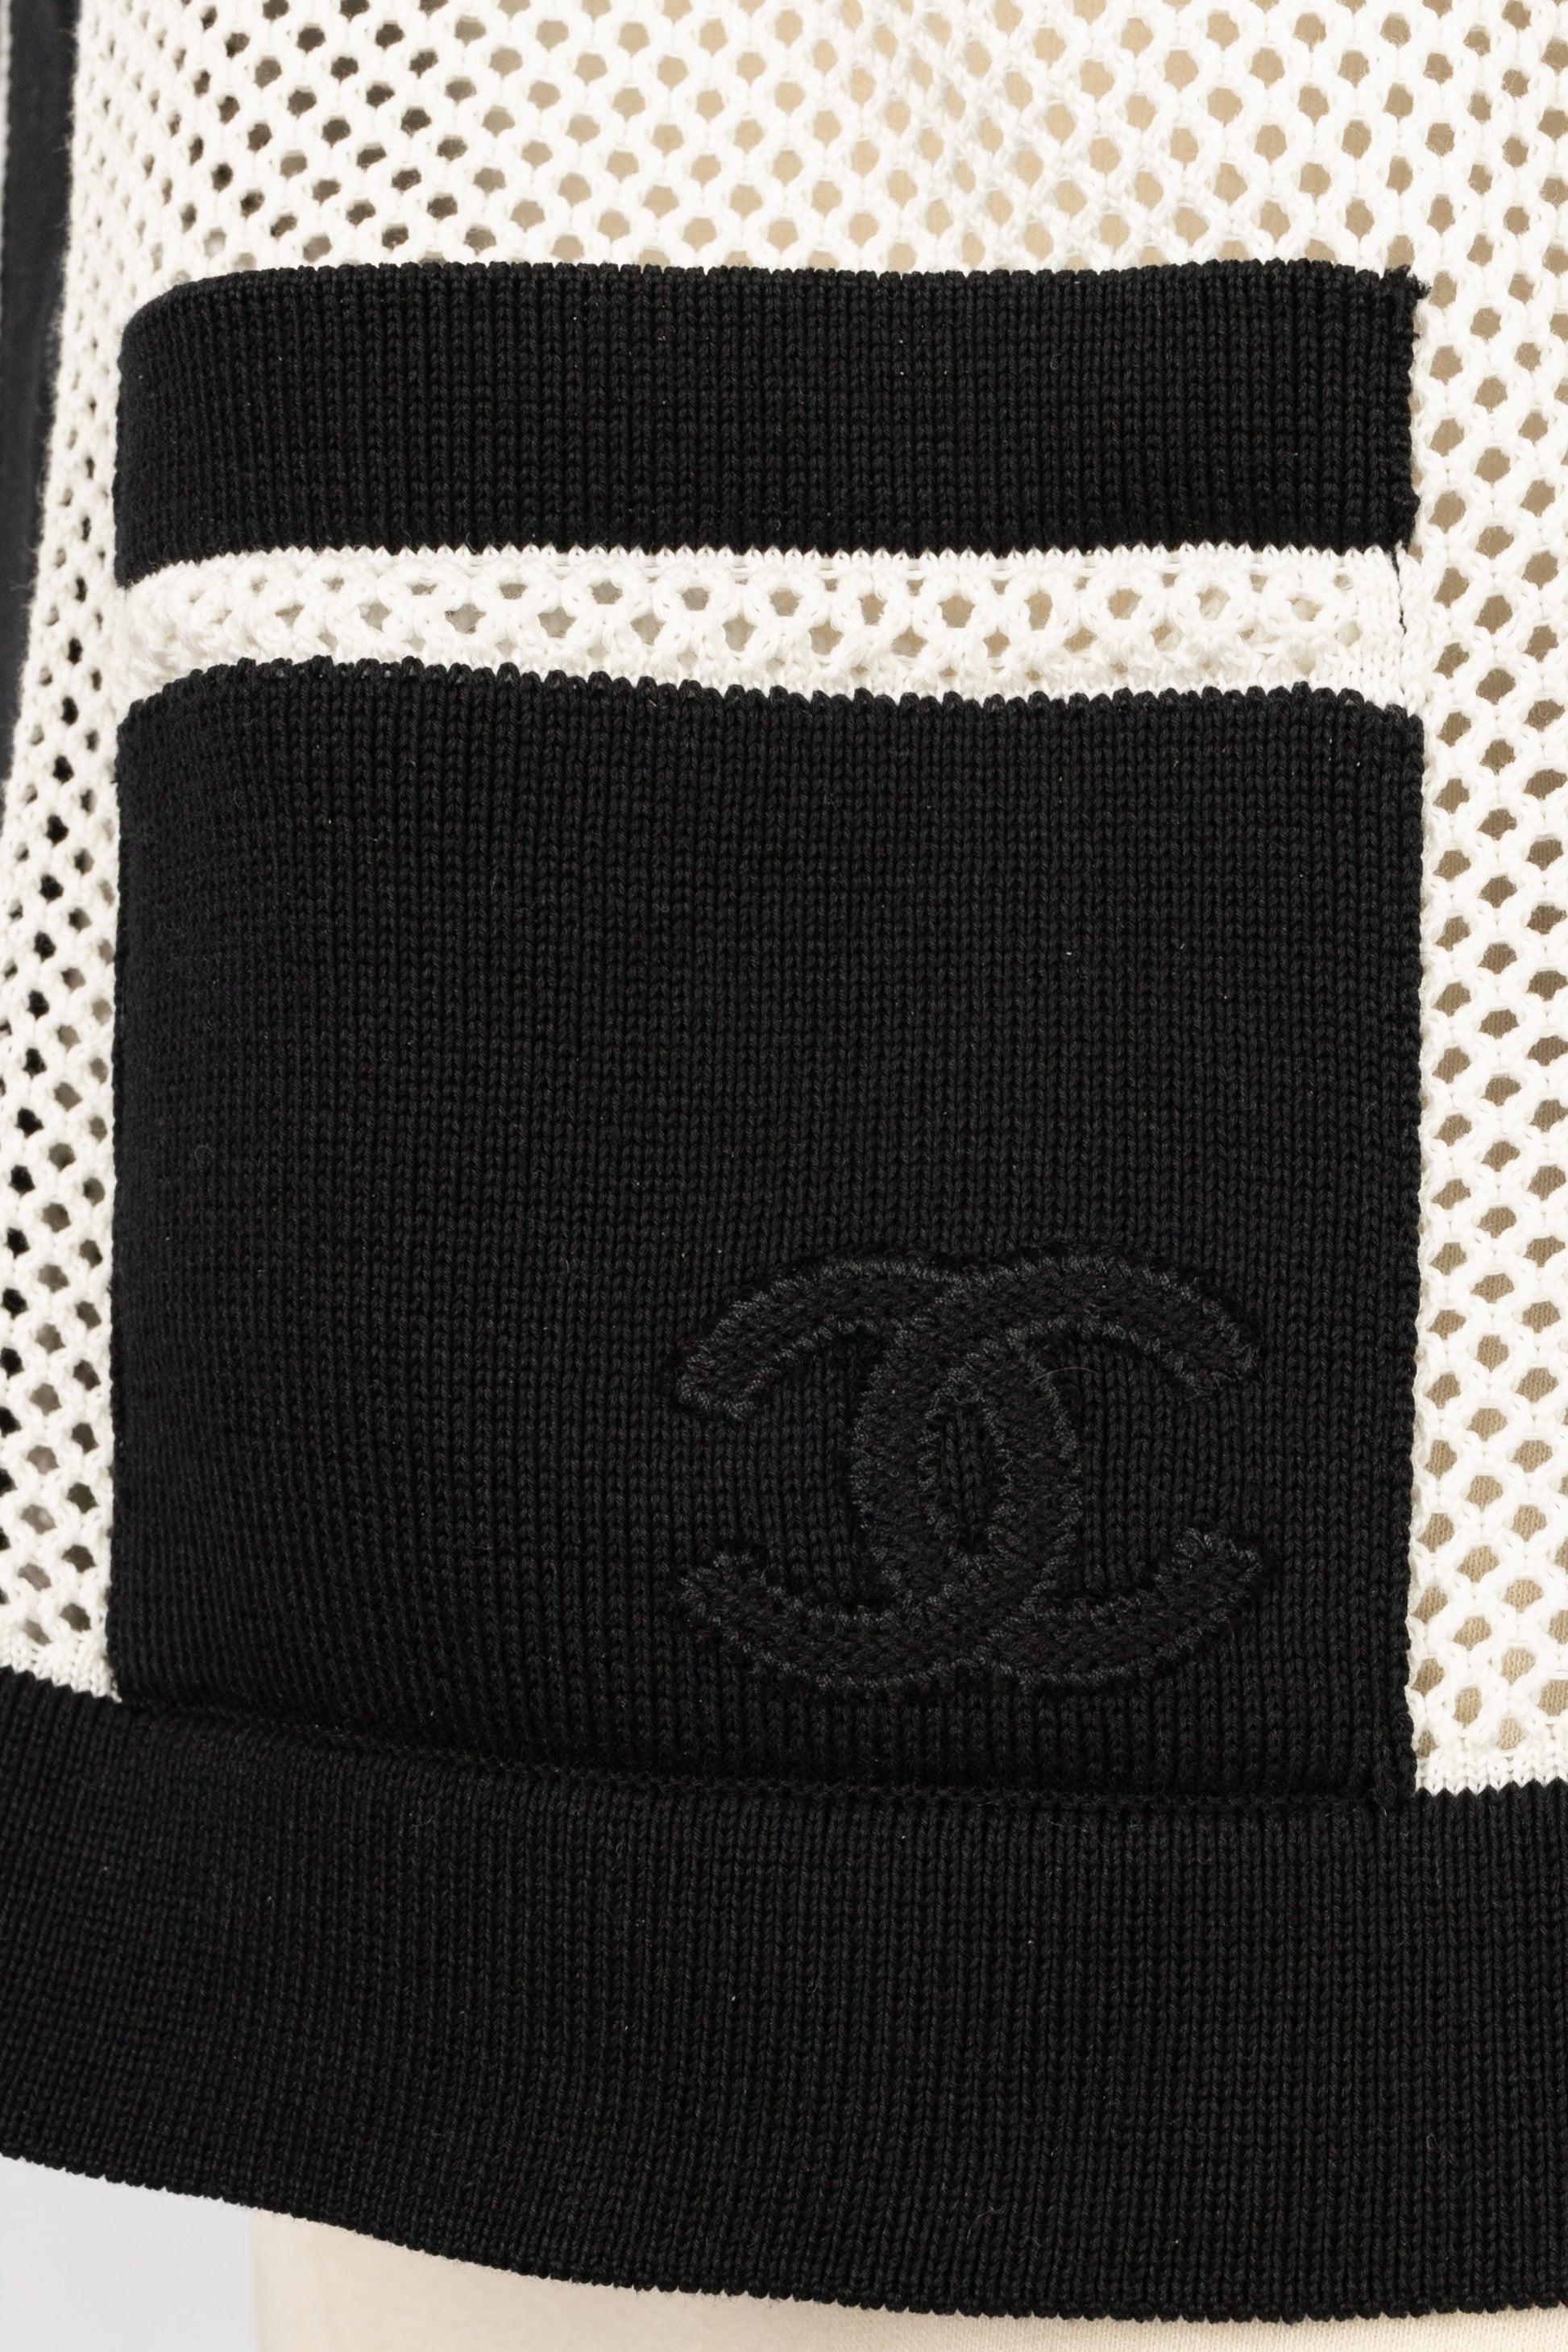 Chanel Jacket-Style Zipped Top in Black and White Mesh For Sale 2